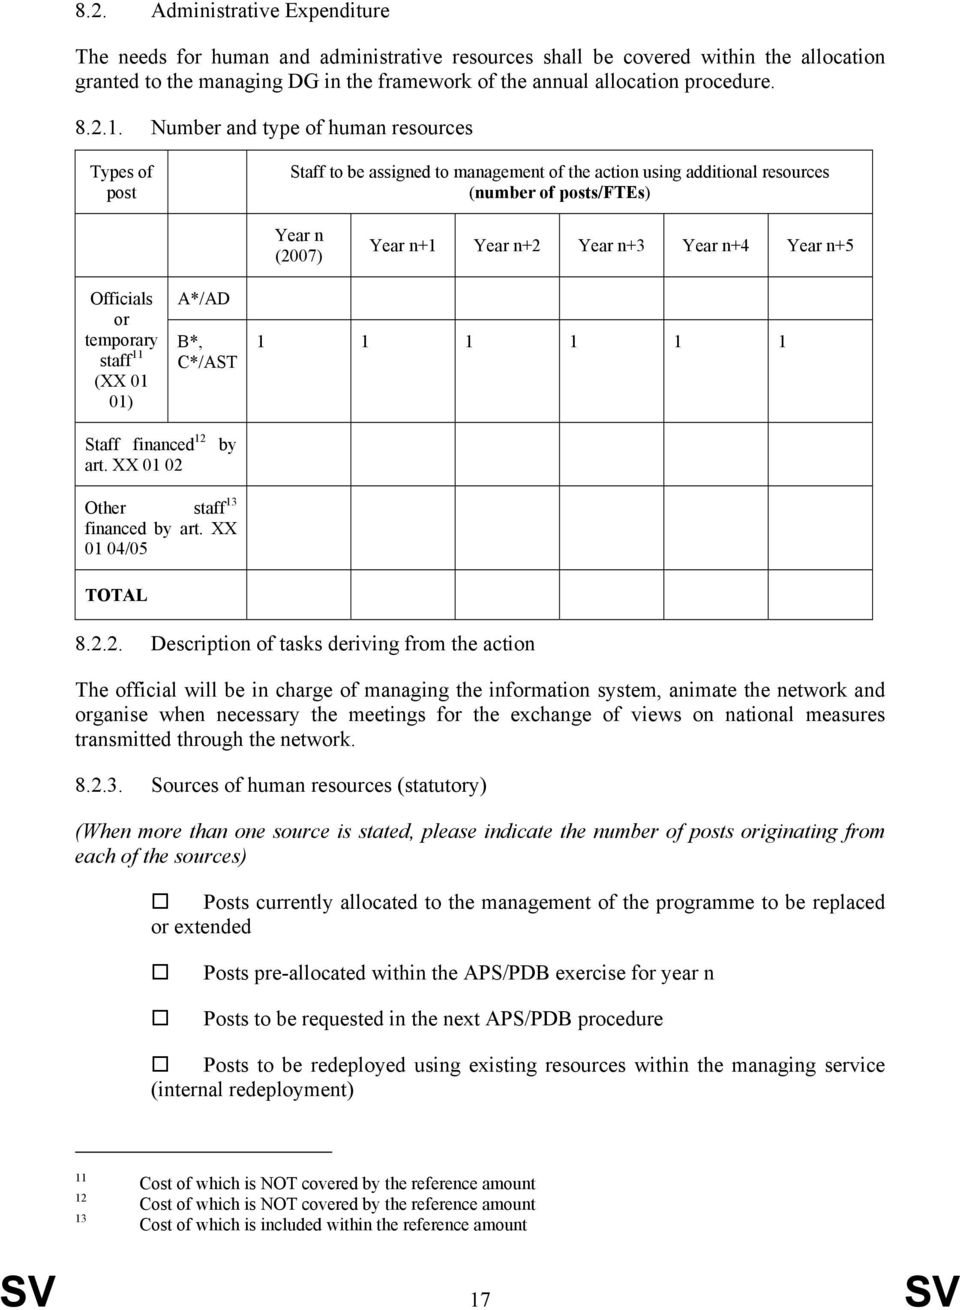 Number and type of human resources Types of post Staff to be assigned to management of the action using additional resources (number of posts/ftes) n (2007) n+1 n+2 n+3 n+4 n+5 Officials or temporary